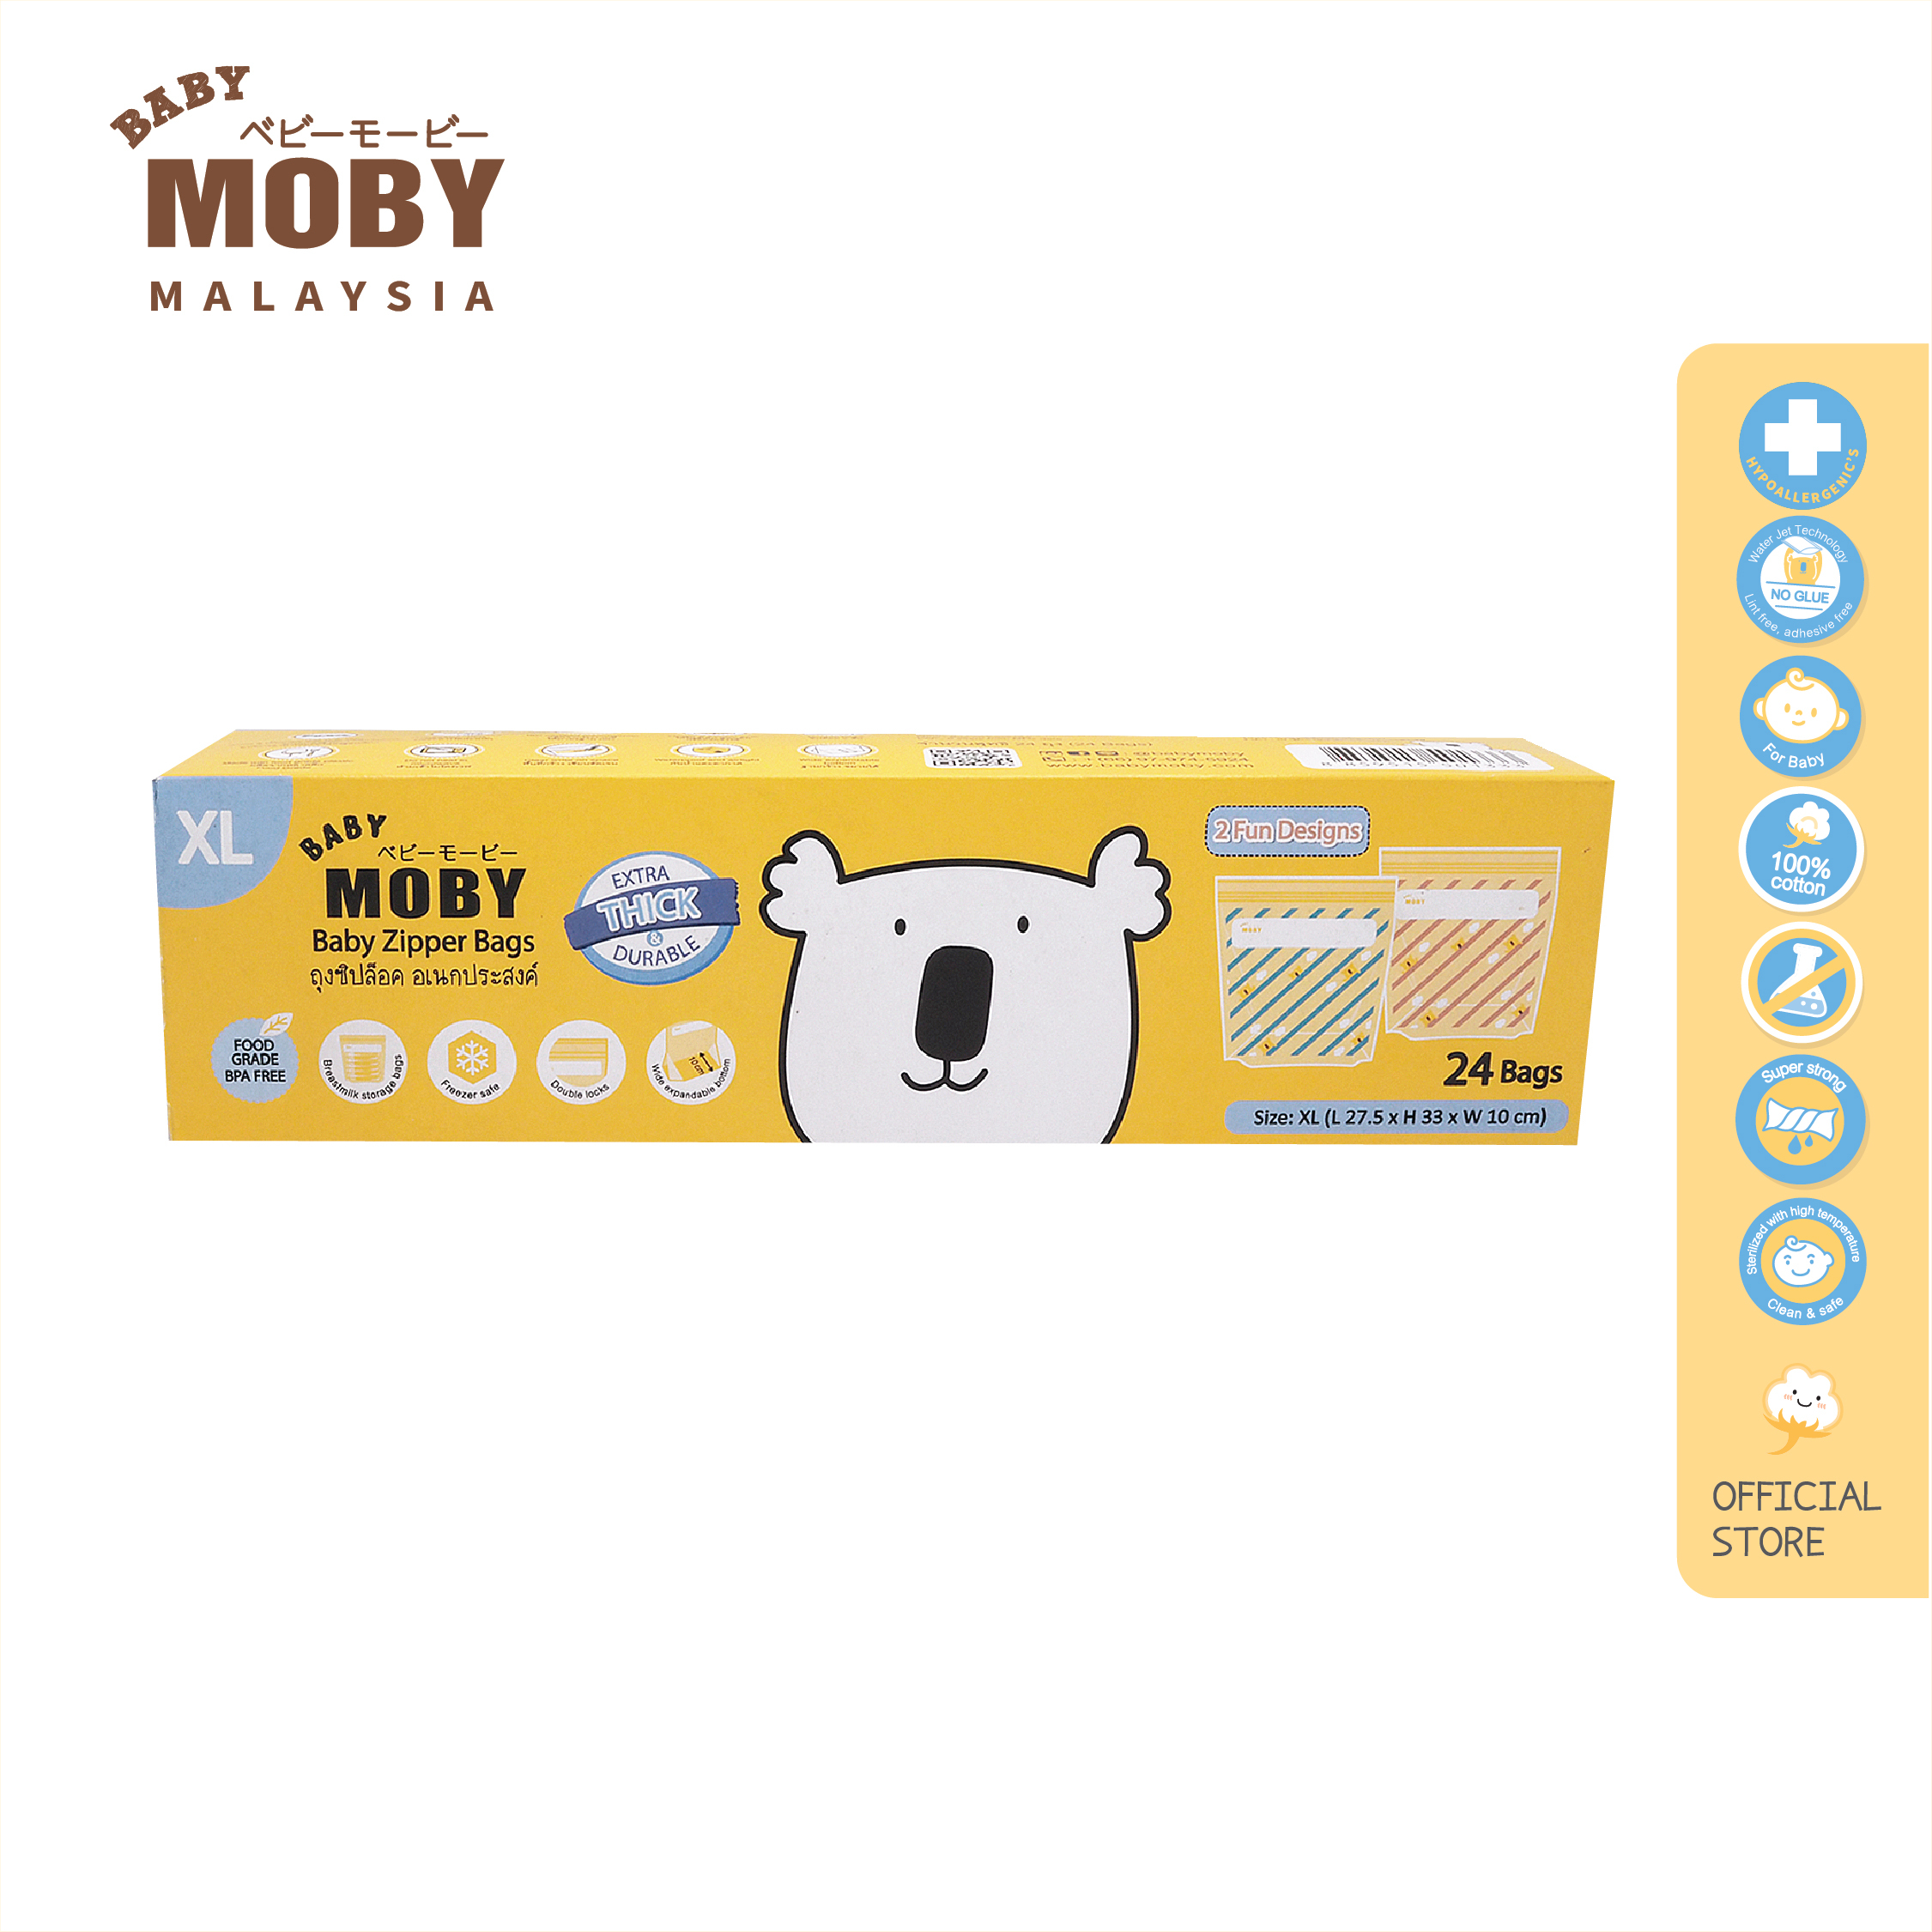 Baby Zipper Bags (Extra Large) – Baby Moby Malaysia